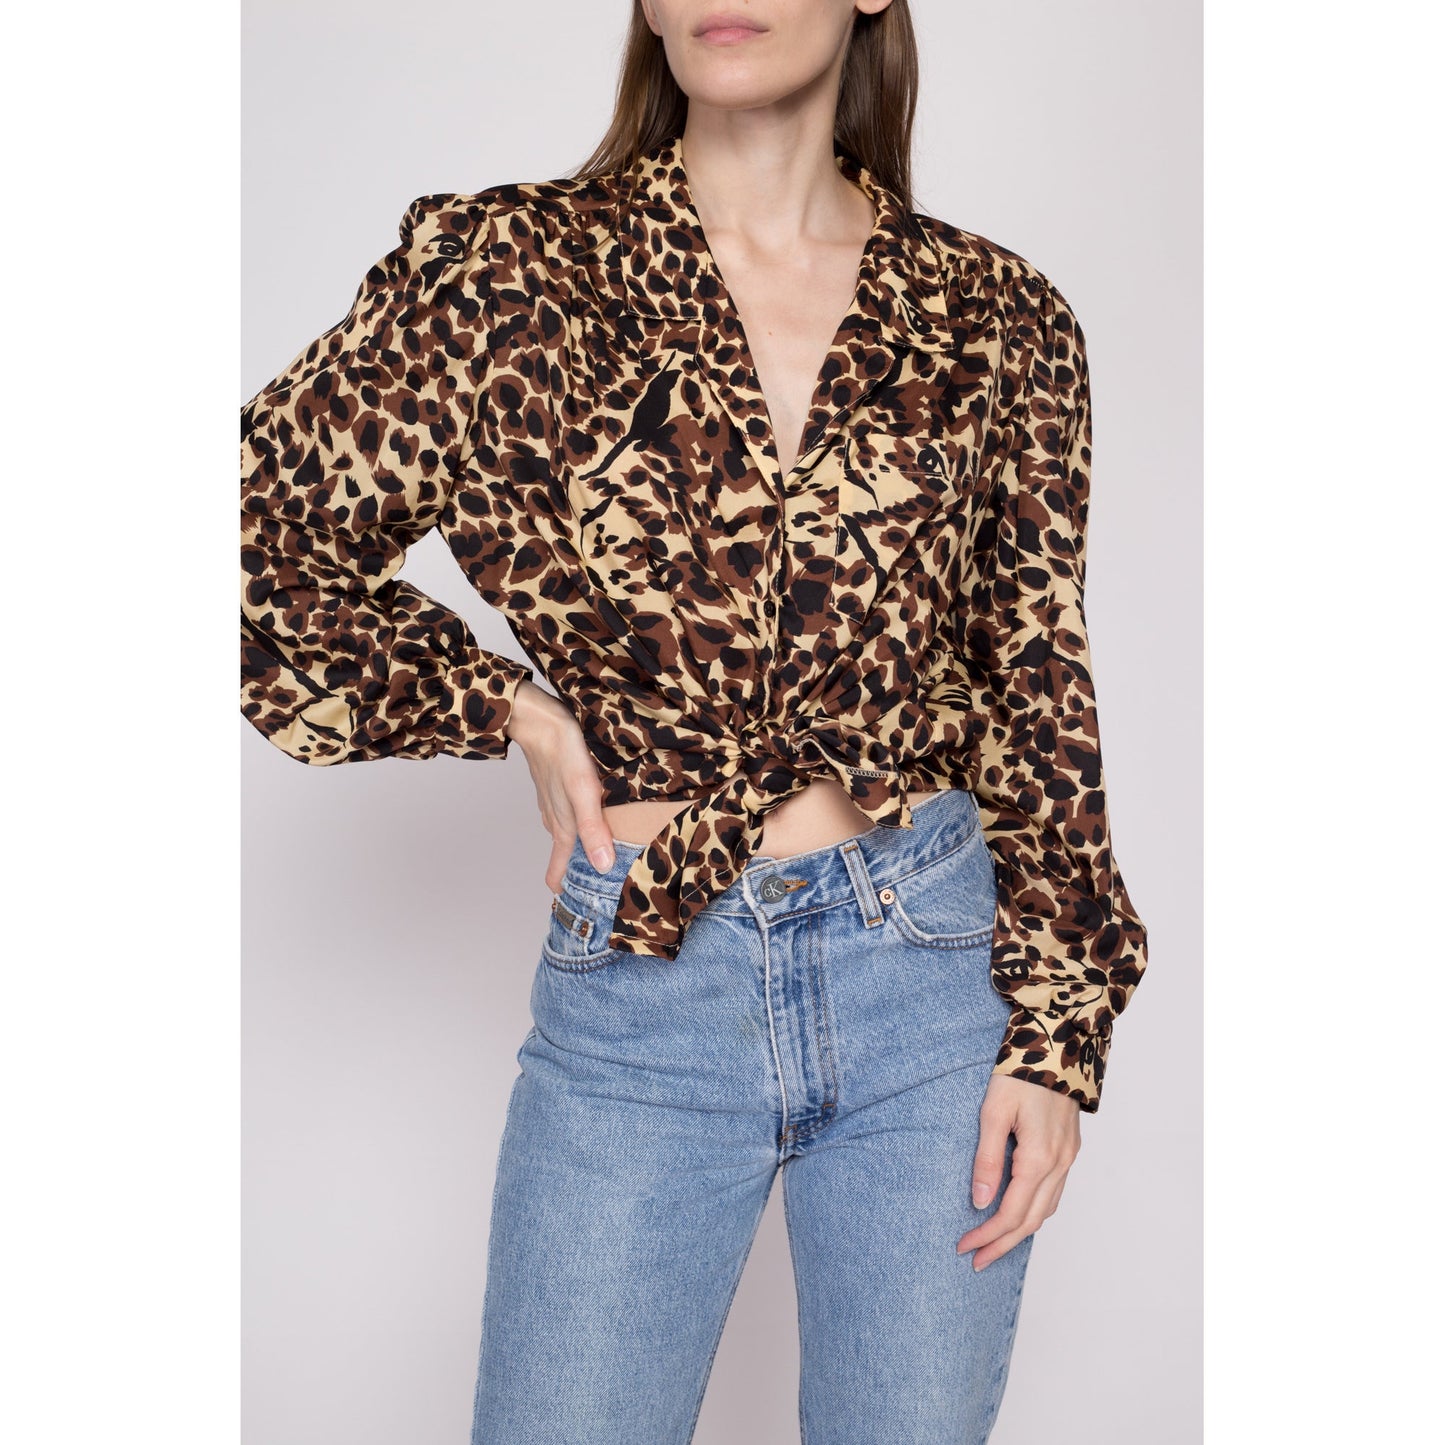 XL| 80s Leopard Print Balloon Sleeve Blouse - Extra Large | Vintage Judy Bond Long Sleeve Collared Button Up Top